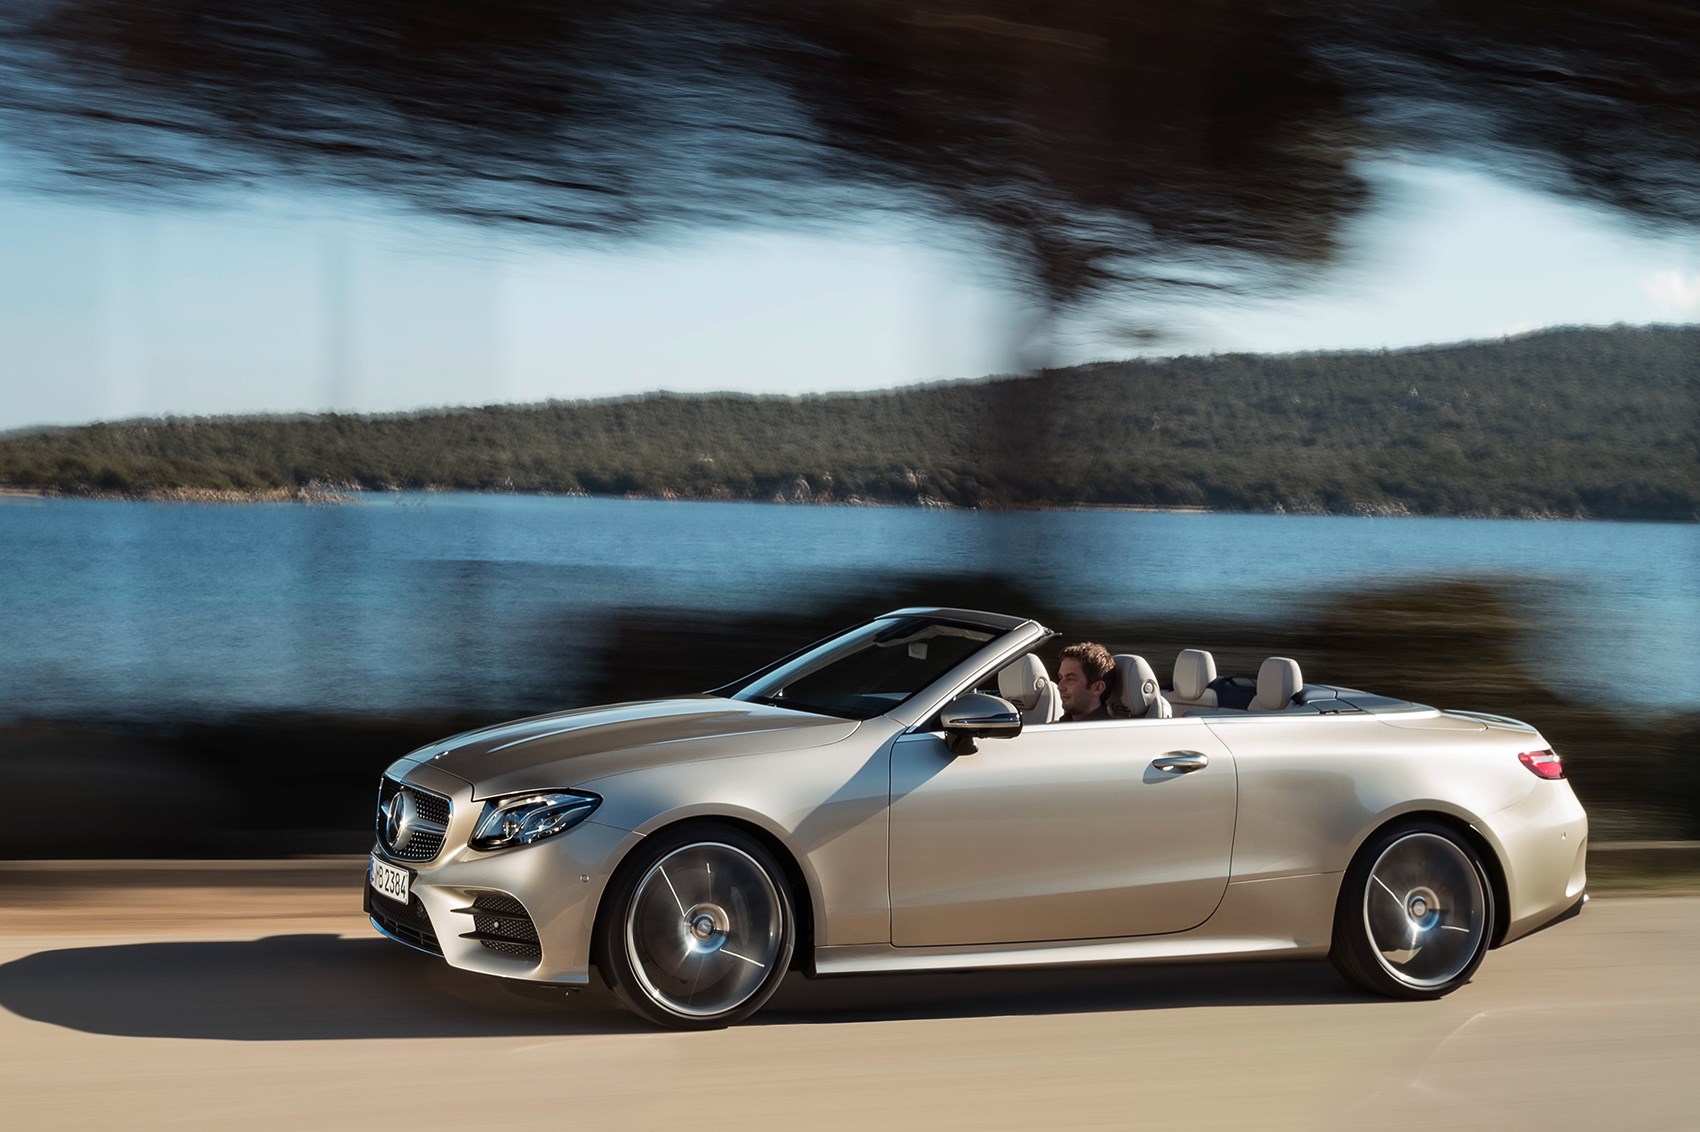 Merc blows the roof off the Mercedes E-class Cabriolet at Geneva 2017